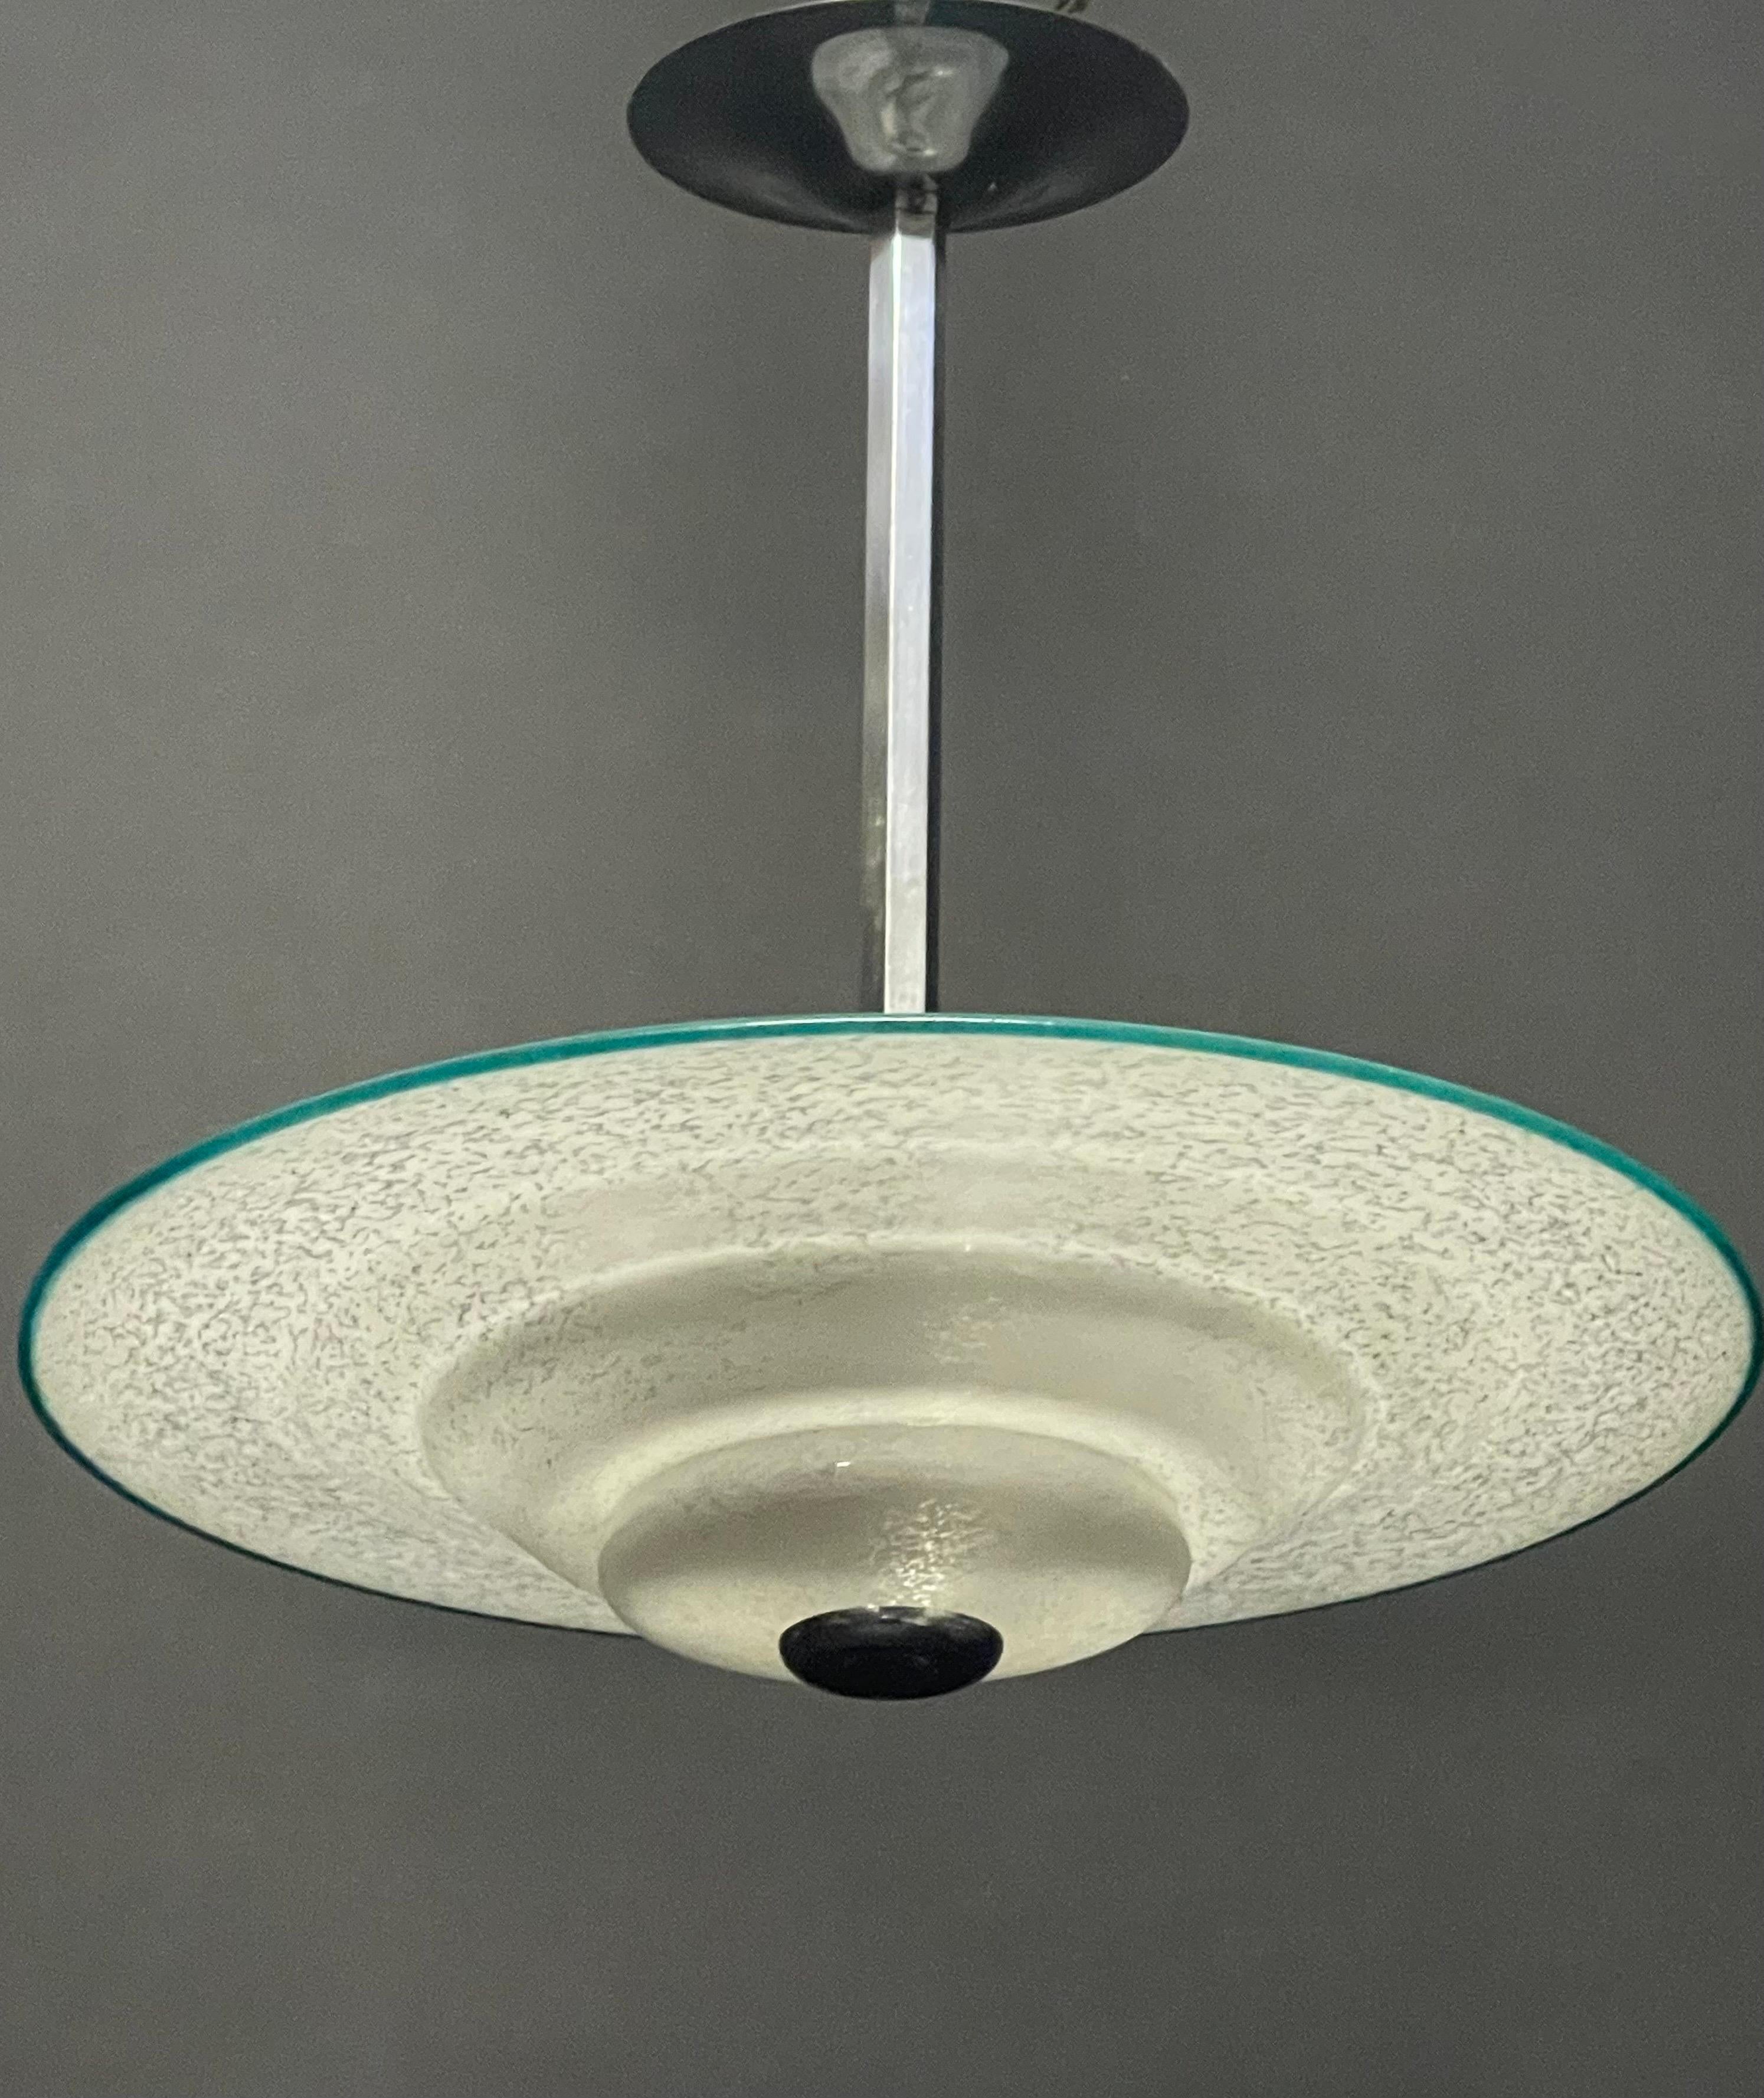 Mid-20th Century French Modernist Art Deco Glass and Chrome Pendant Chandelier, circa 1930s For Sale